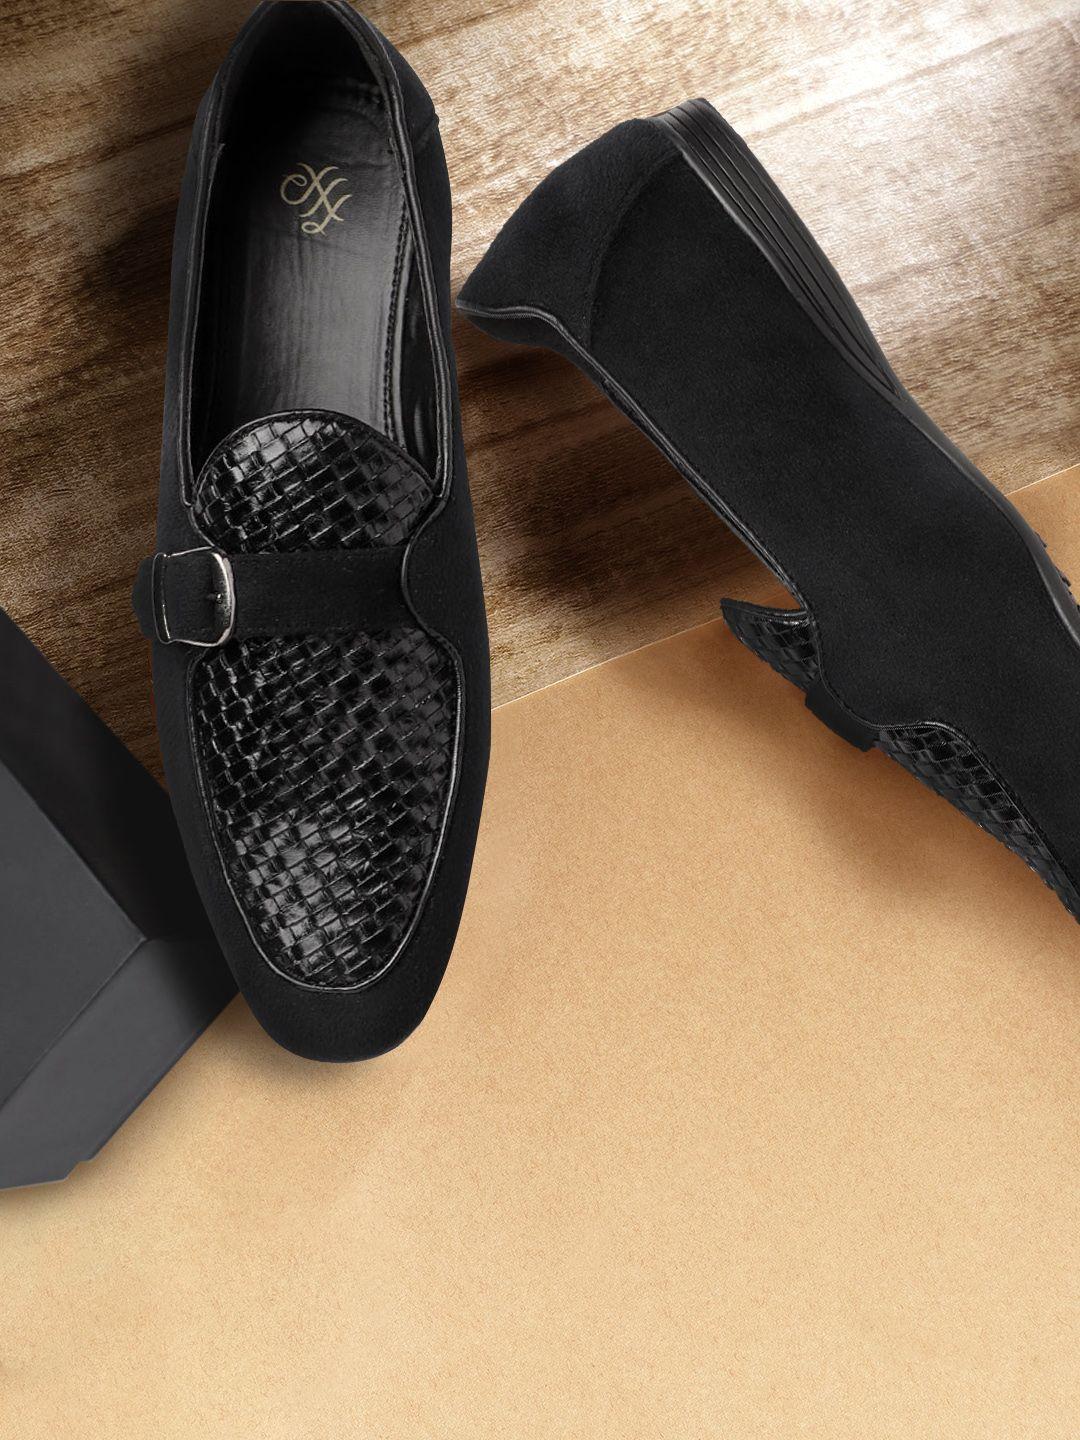 house-of-pataudi-men-black-basketweave-textured-handcrafted-leather-loafers